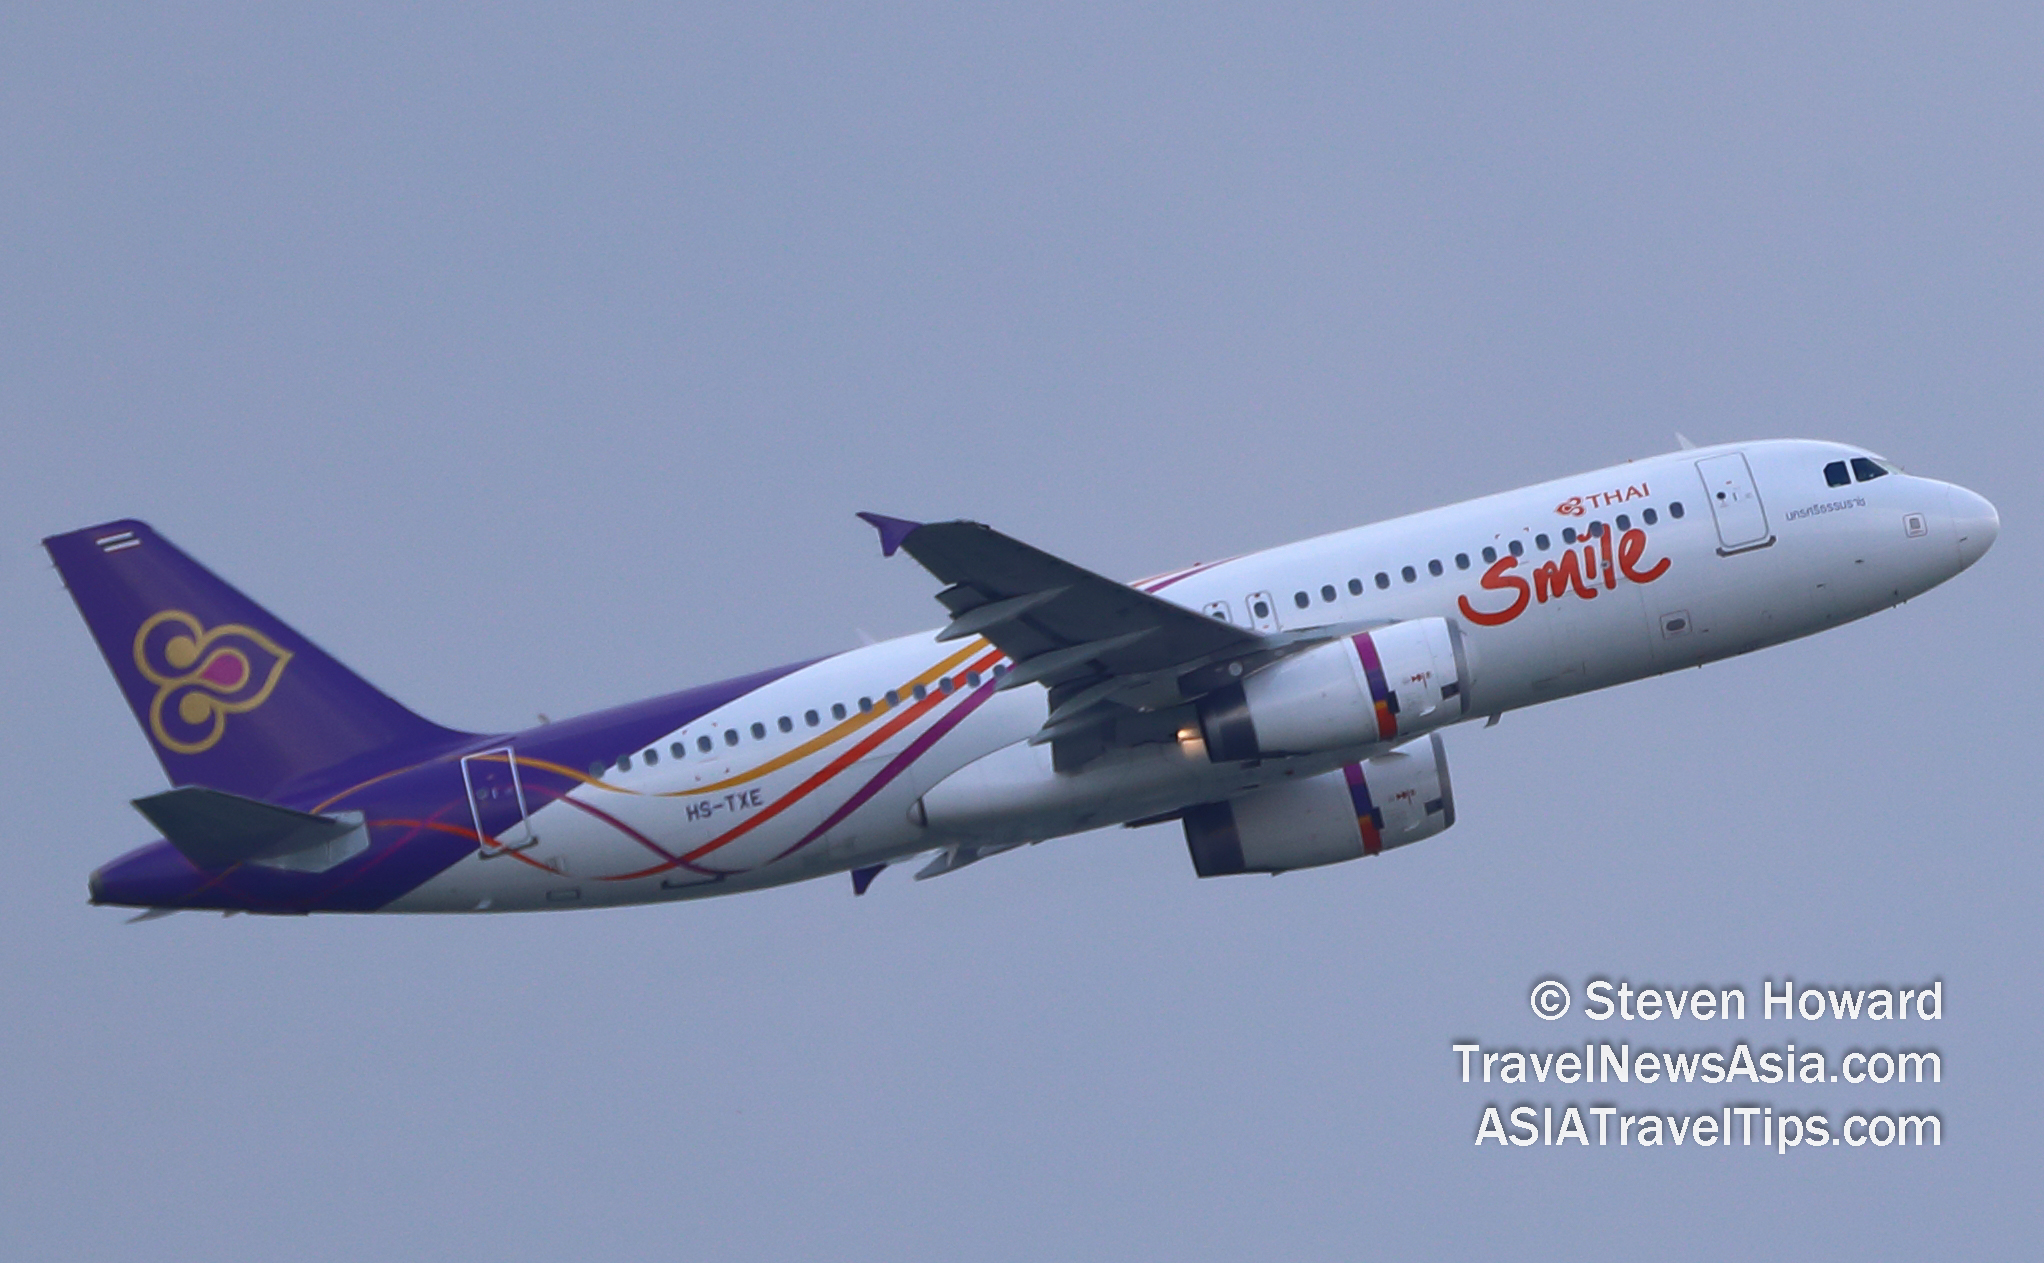 Thai Smile Airbus A320 reg: HS-TXE taking off from Suvarnabhumi Airport (BKK) near Bangkok, Thailand. Picture by Steven Howard of TravelNewsAsia.com Click to enlarge.